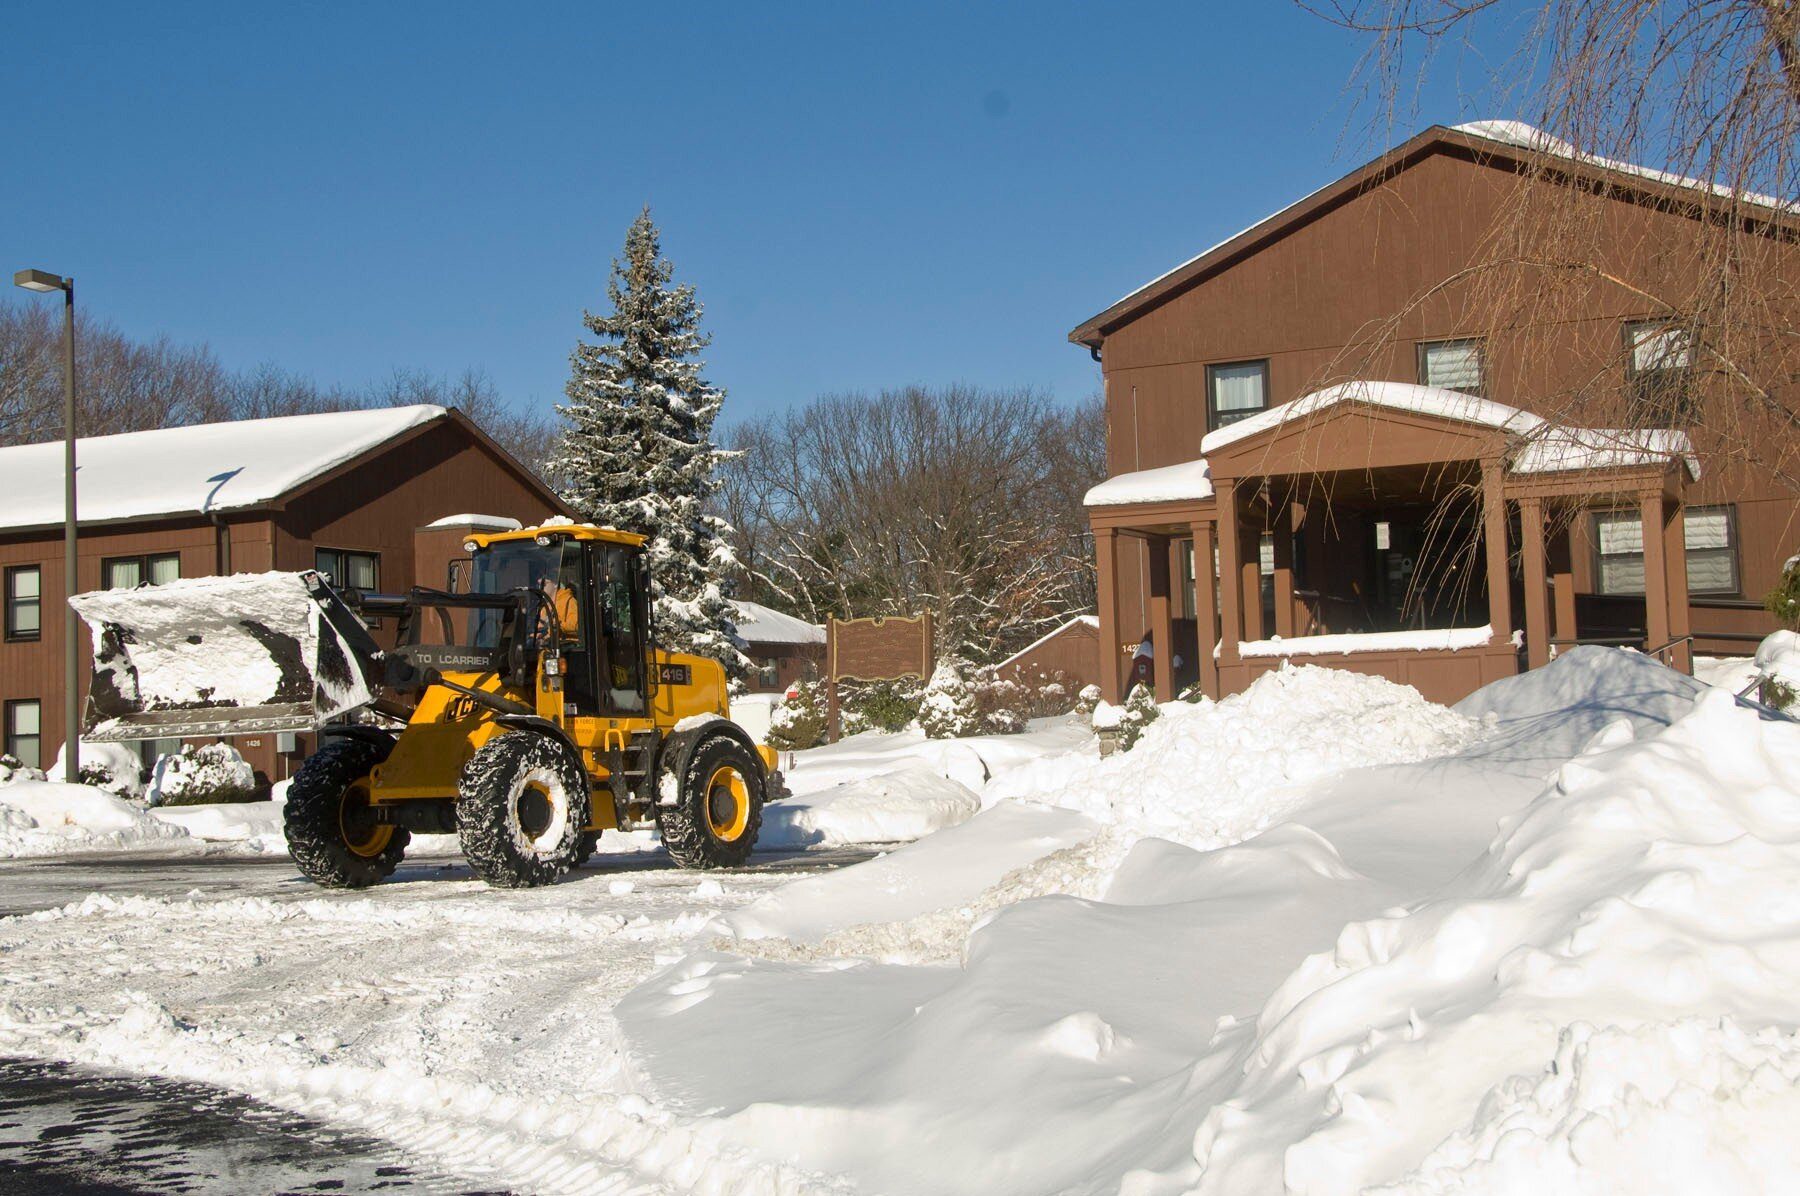 snow removal is their proactive approach to clearing snow and ice